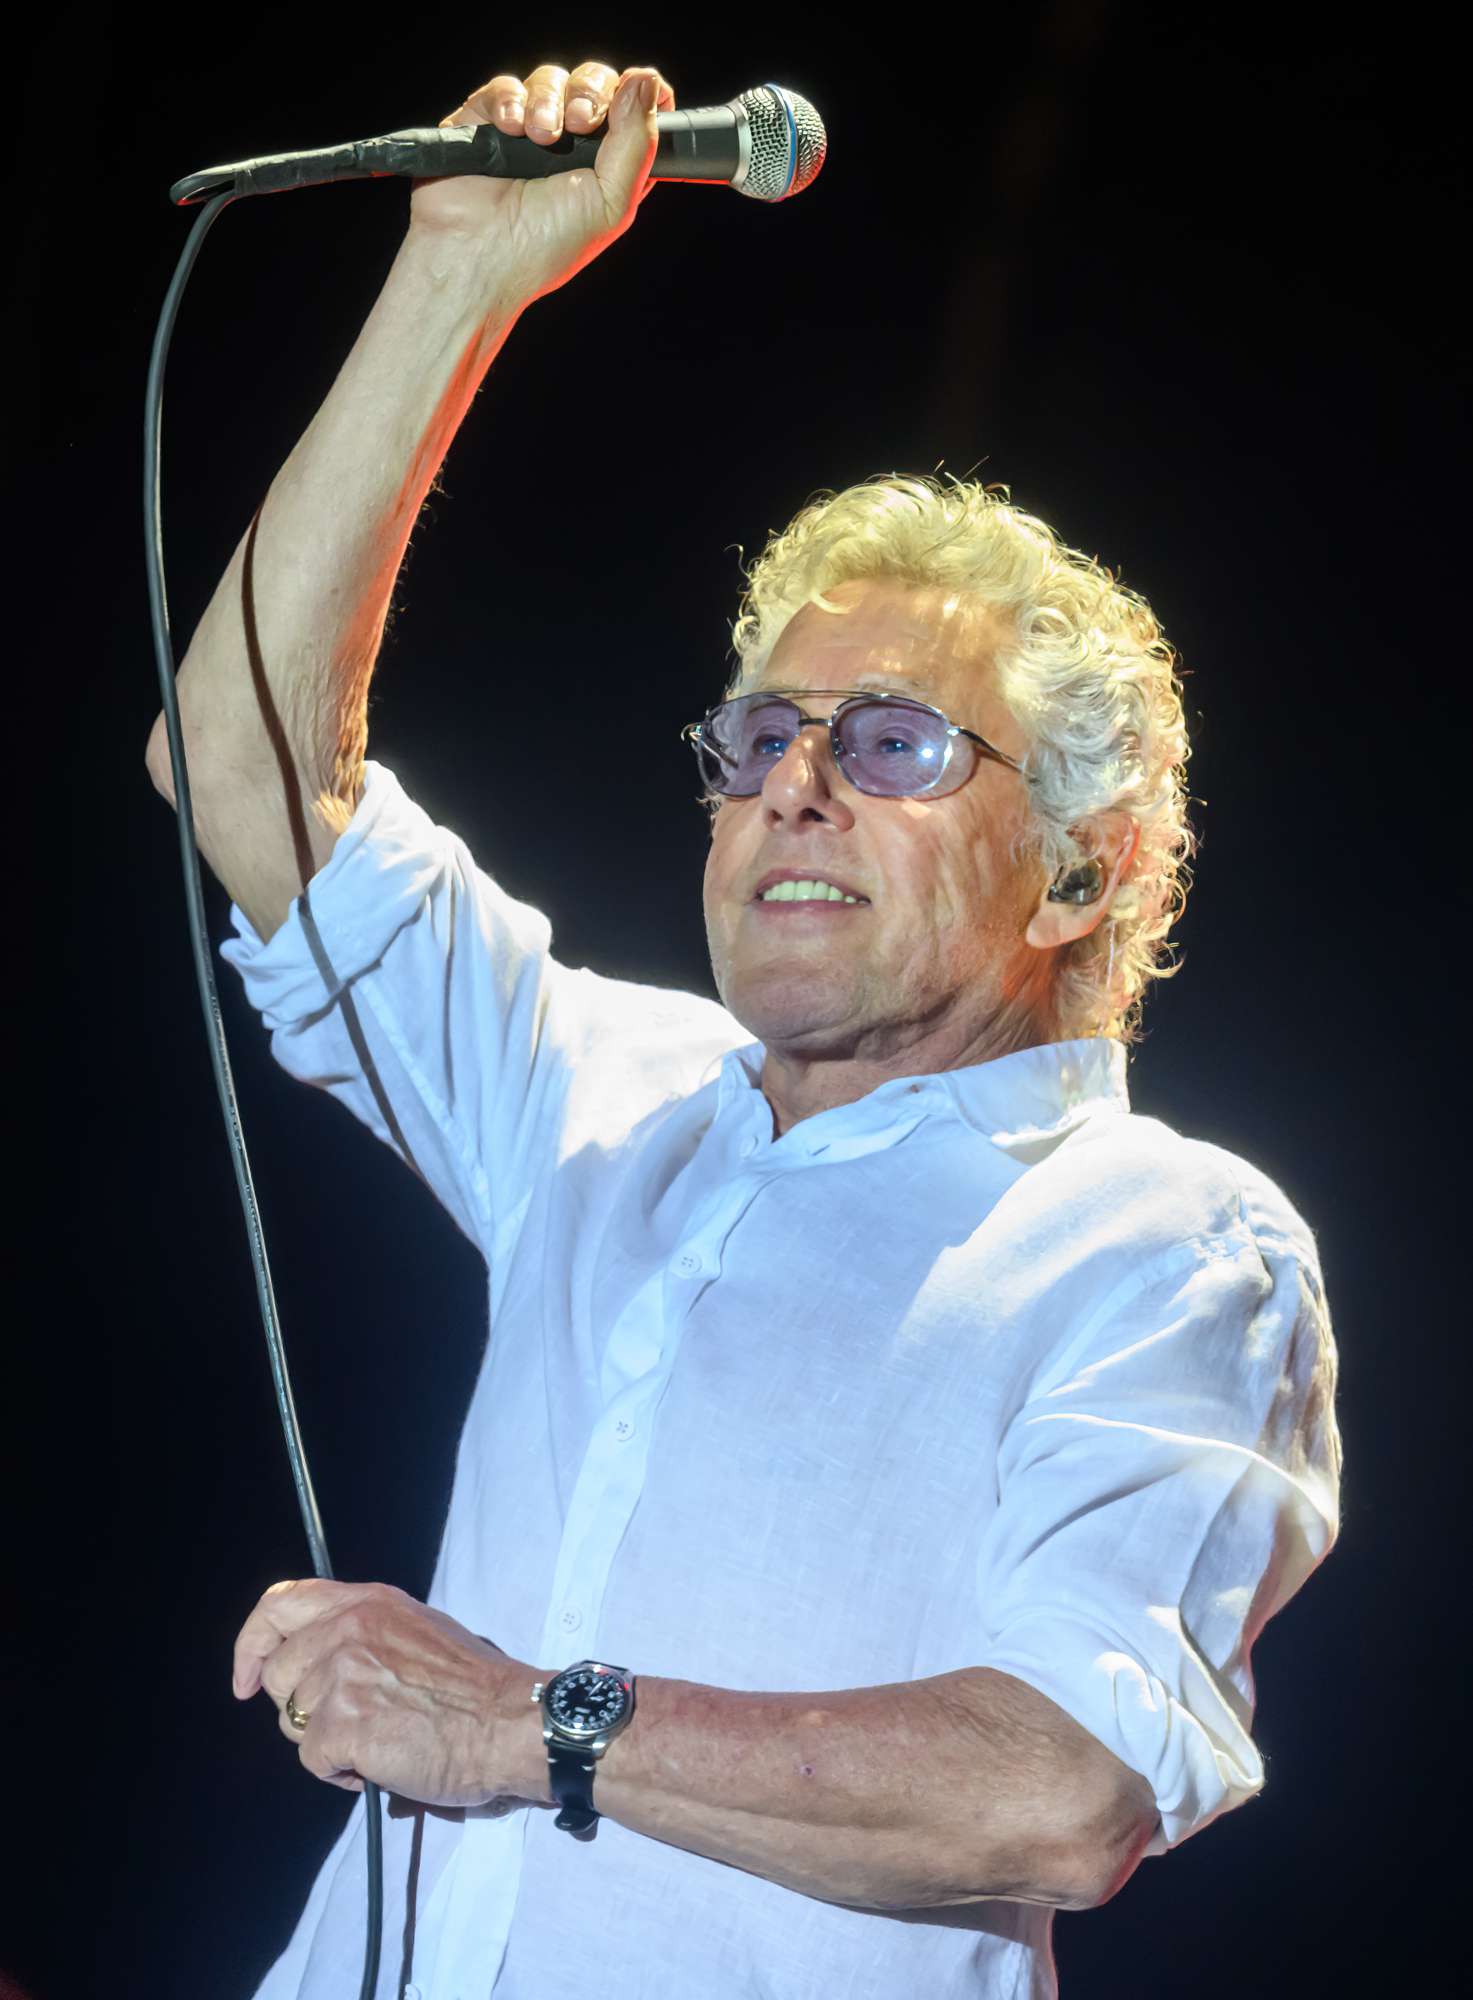 Roger Daltrey of The Who performs with The Royal Philharmonic Concert Orchestra at Royal Sandringham Estate